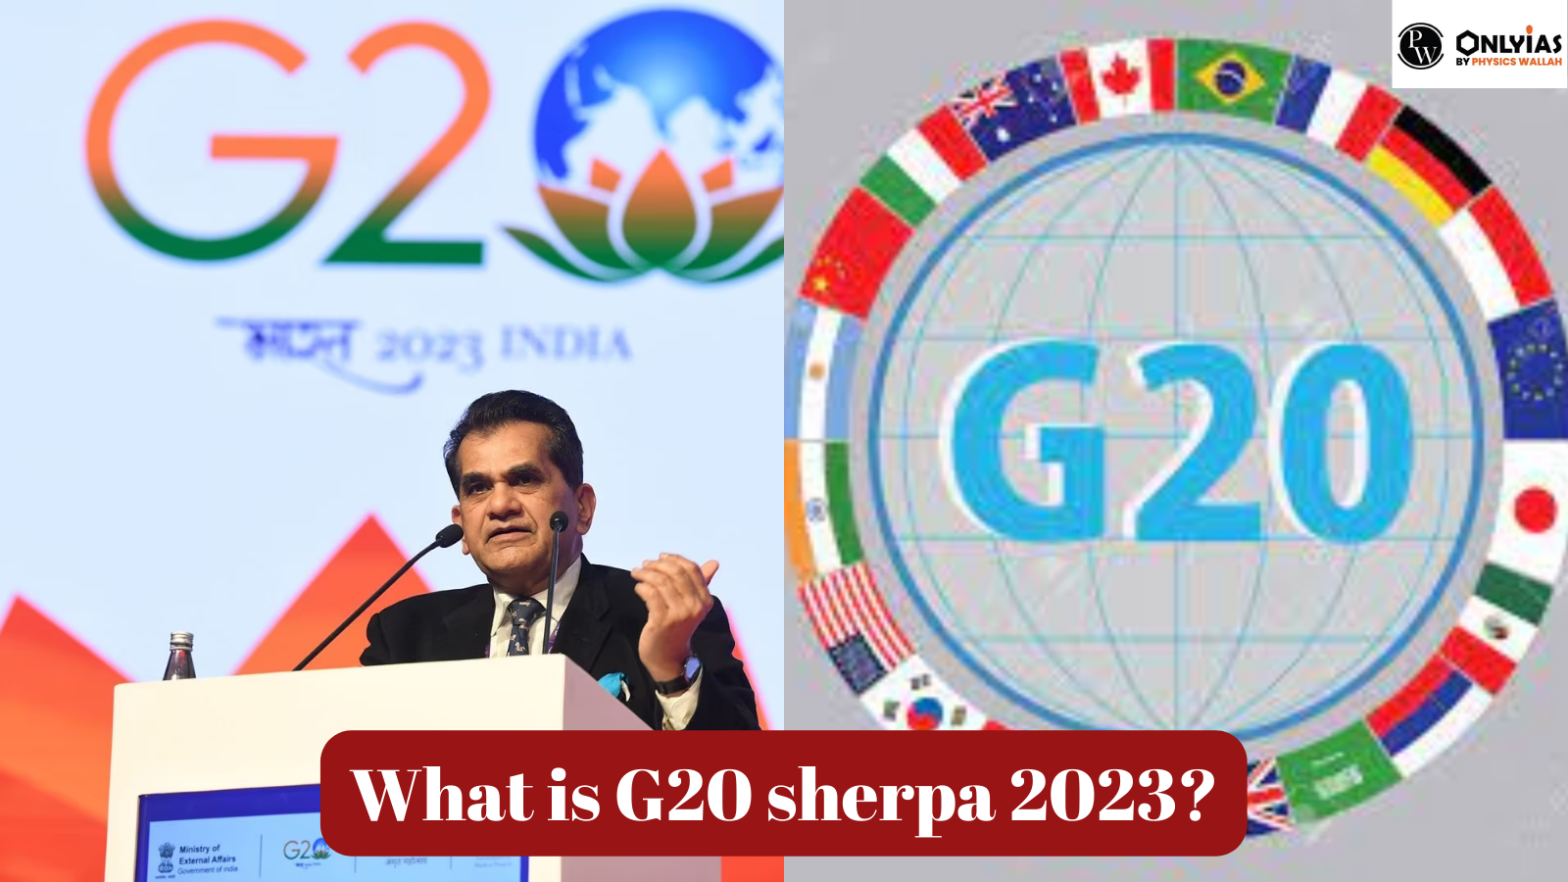 G20 Sherpa: What is G20 Sherpa 2023? Know Key Roles And Responsibilities